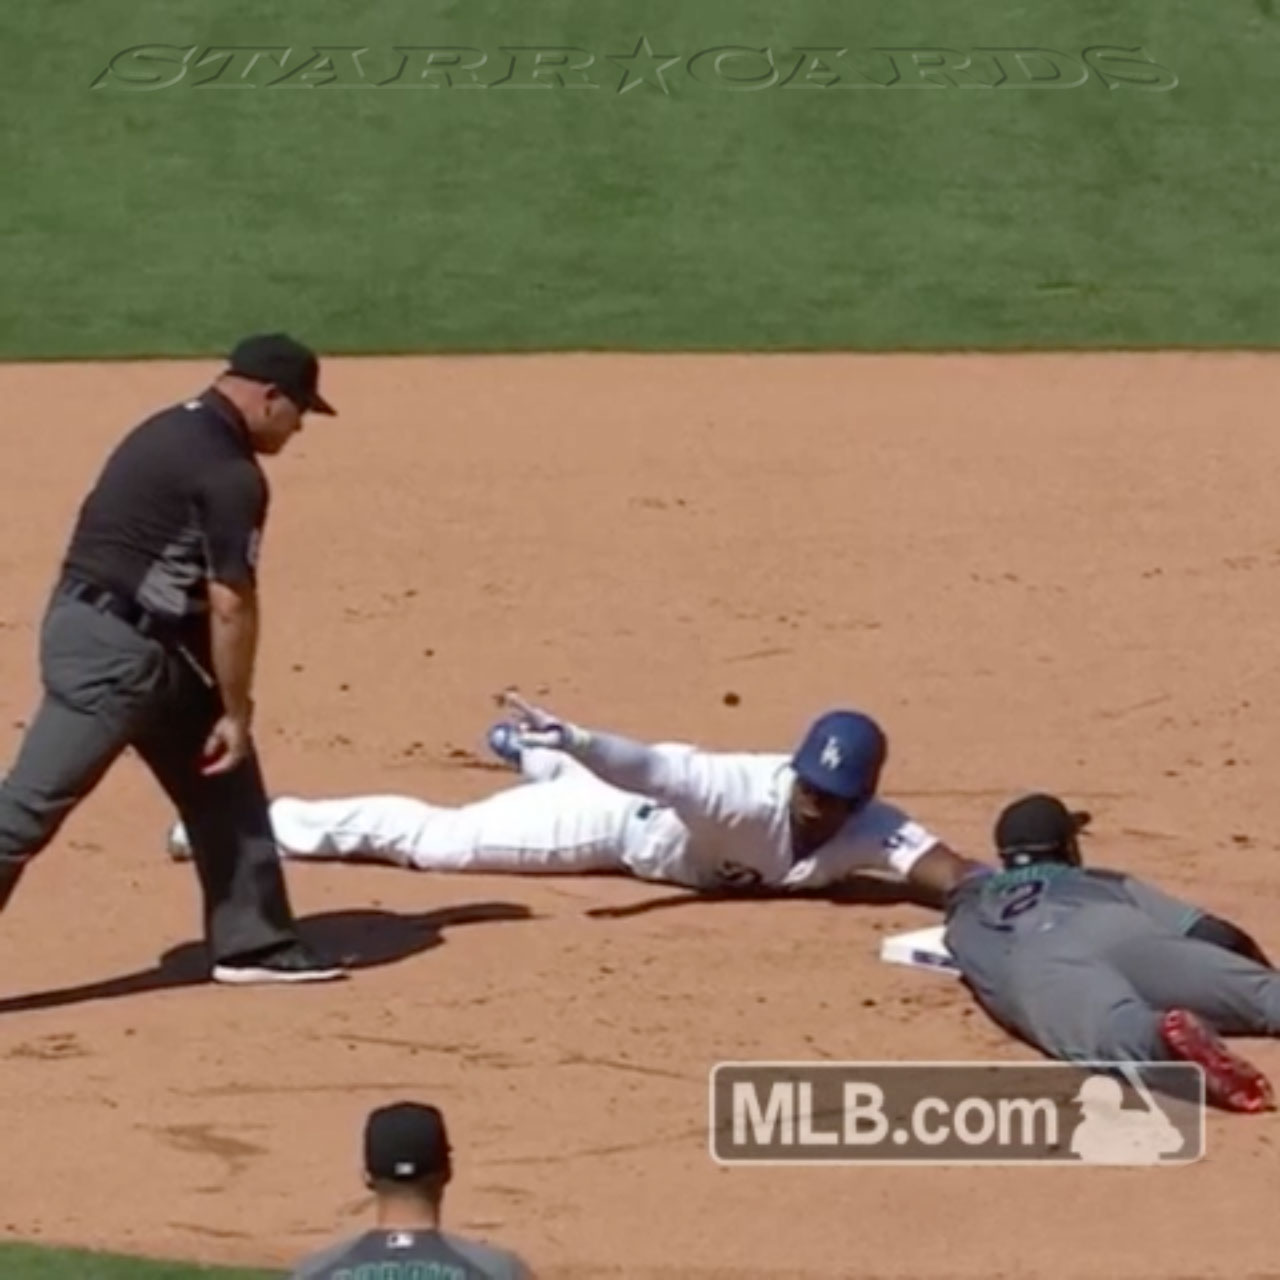 Dodgers' Yasiel Puig is safe at second after avoiding tag